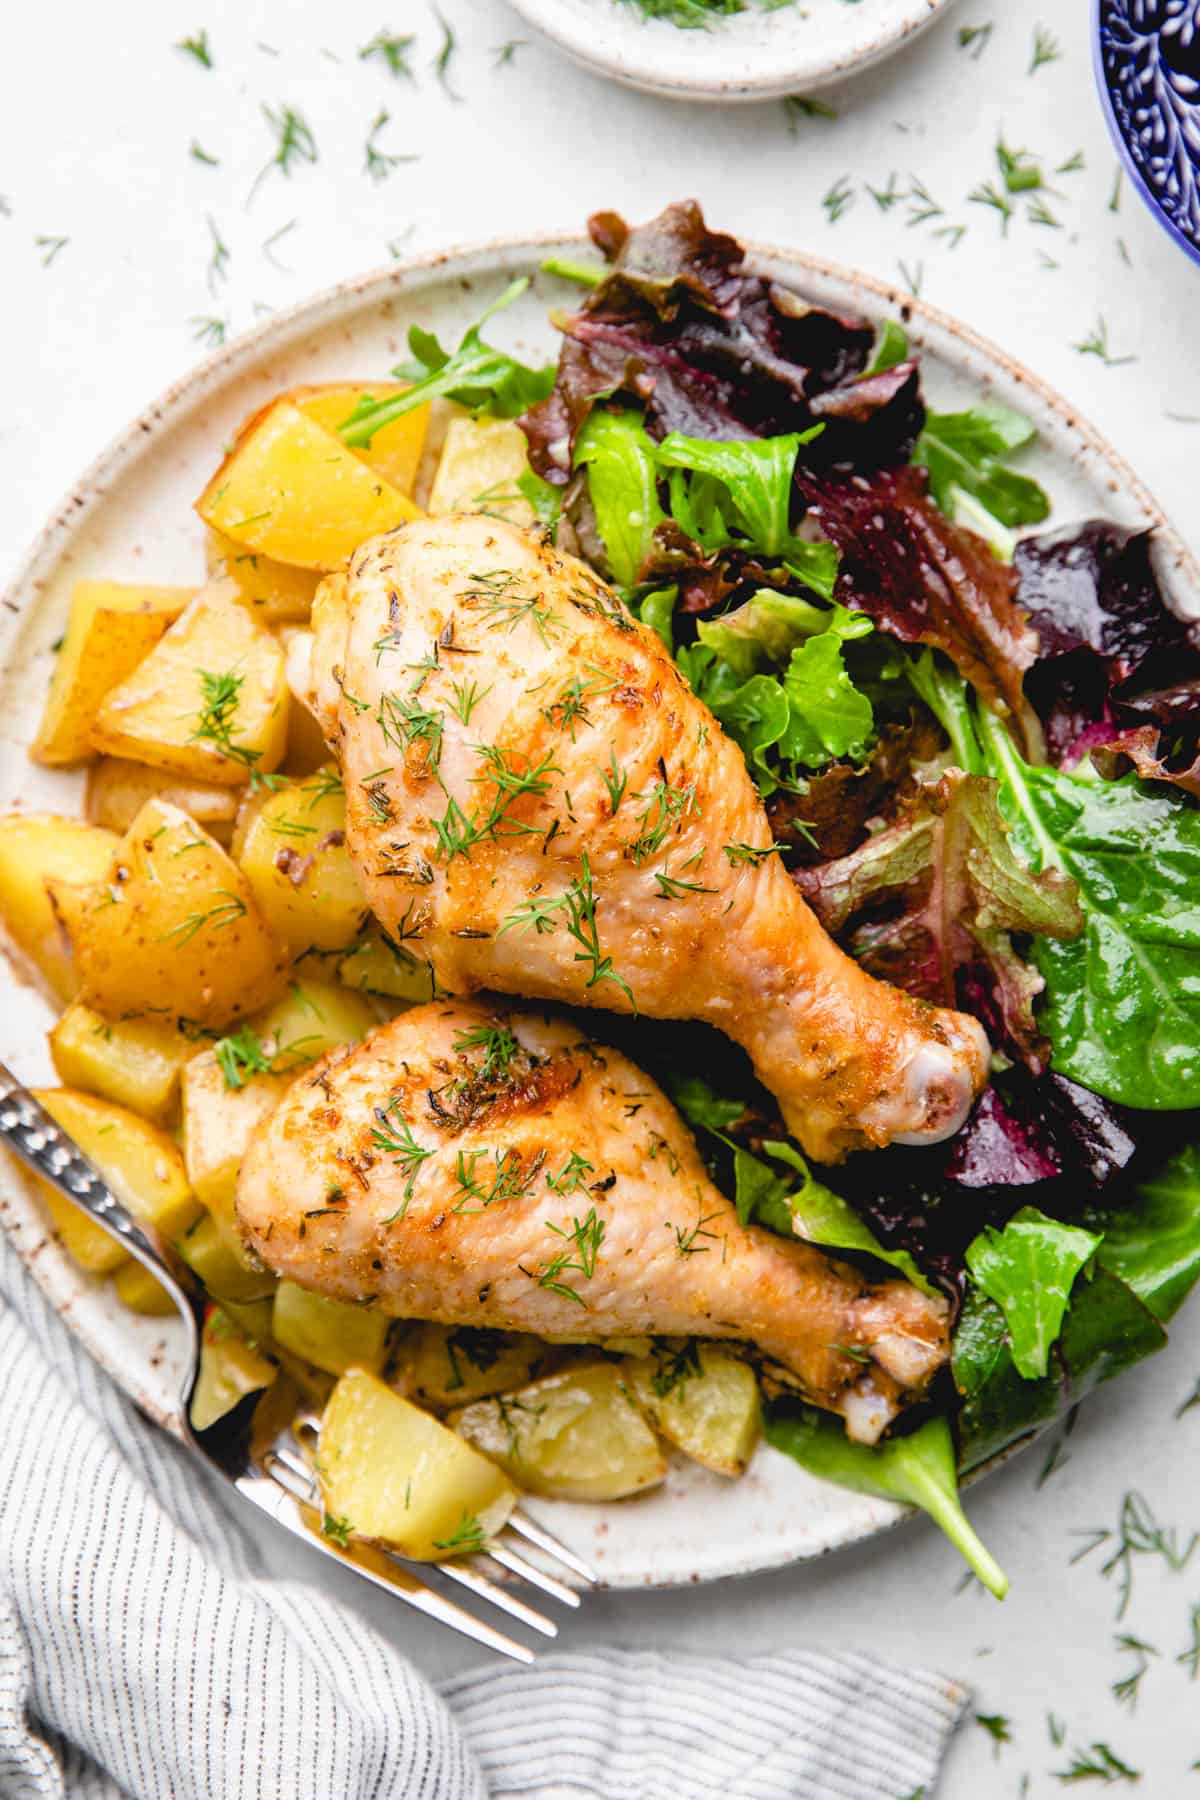 Chicken drumsticks with potatoes and salad on a plate.